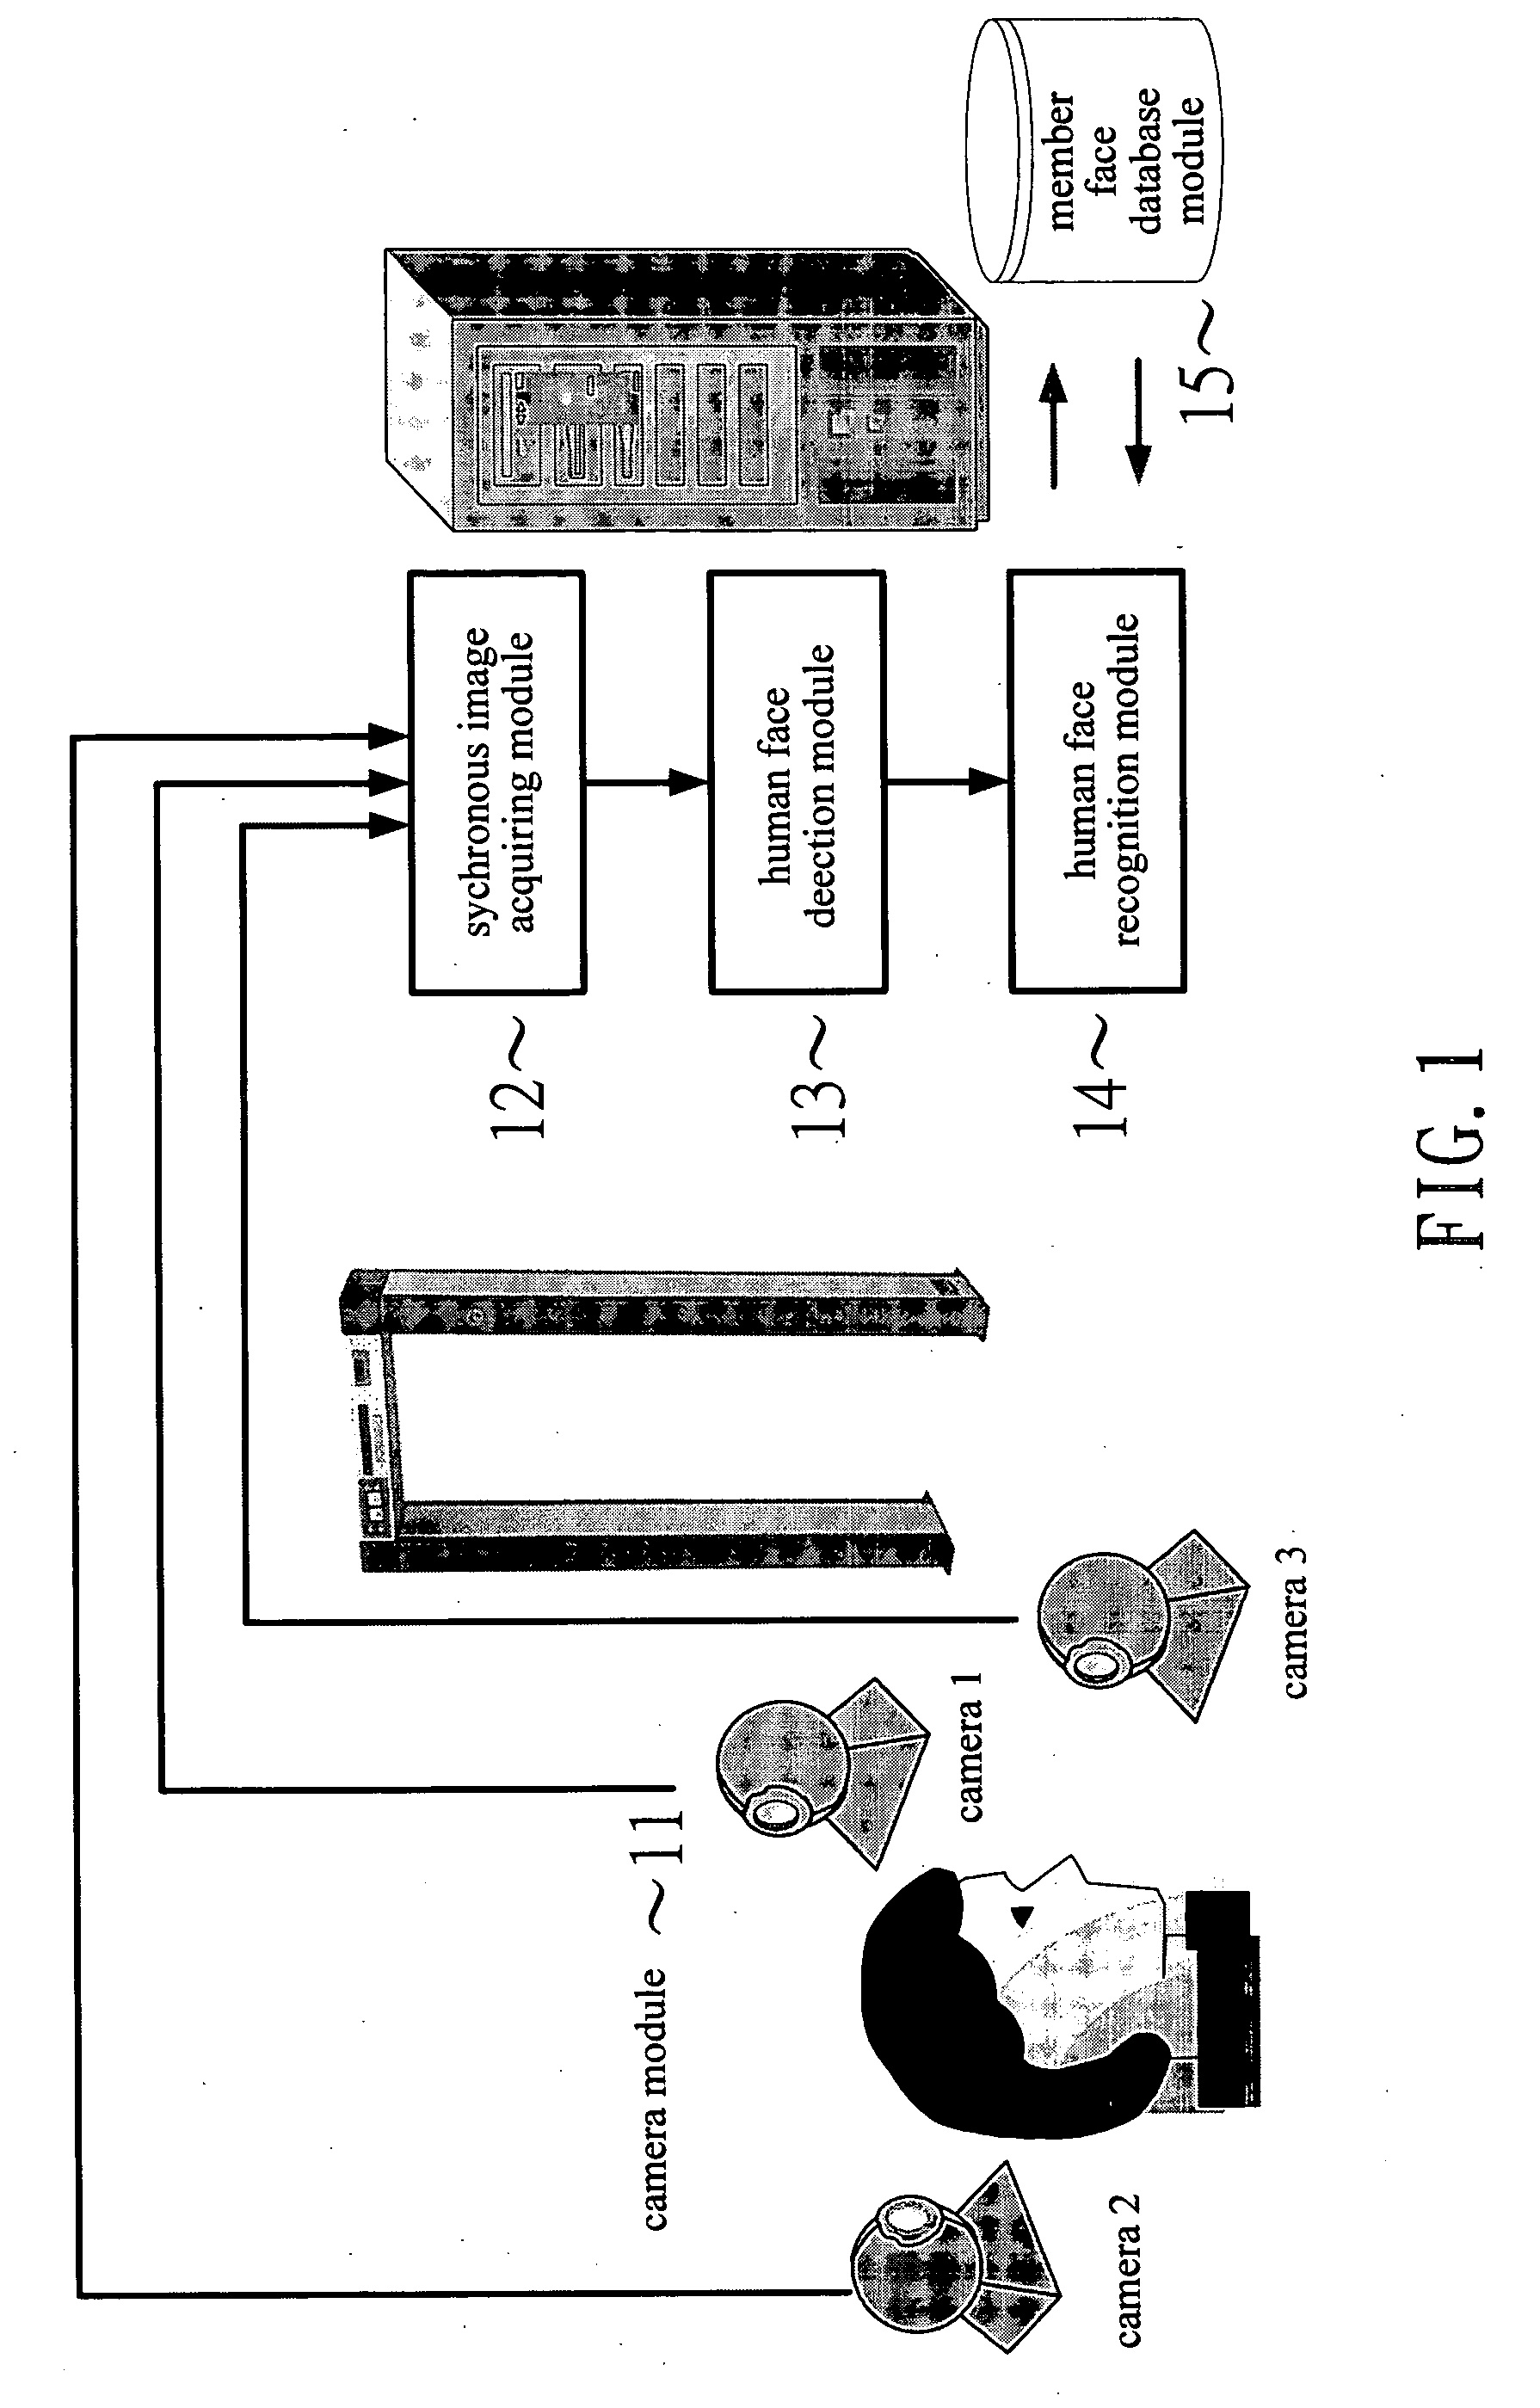 Method and device for human face detection and recognition used in a preset environment